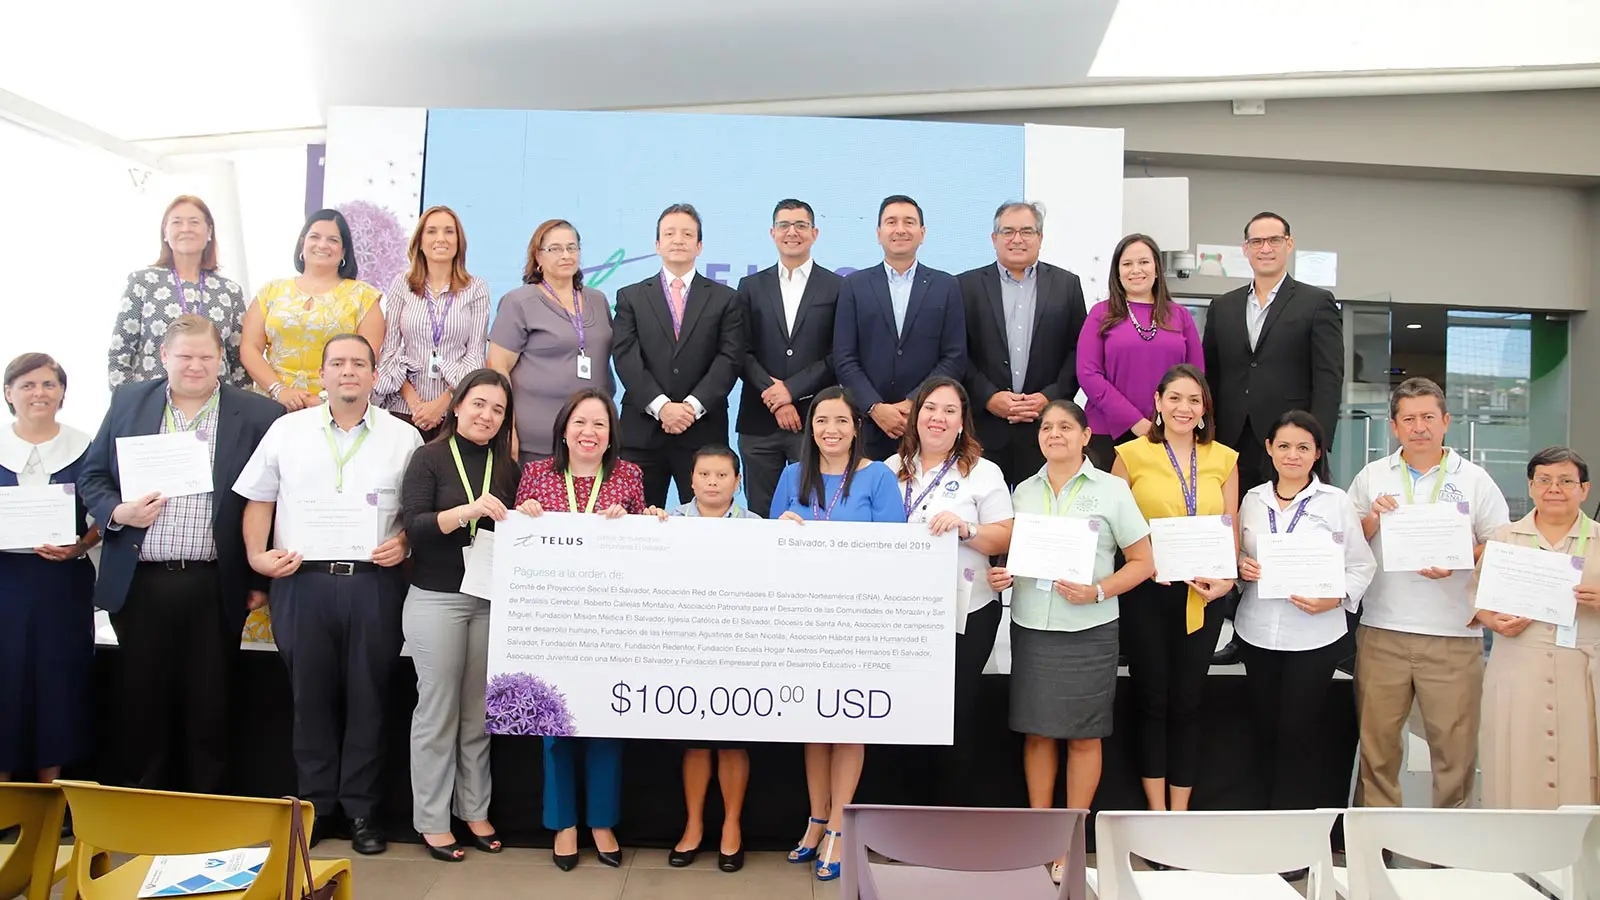 A group of people smiling and holding a large $100,000 USD cheque.